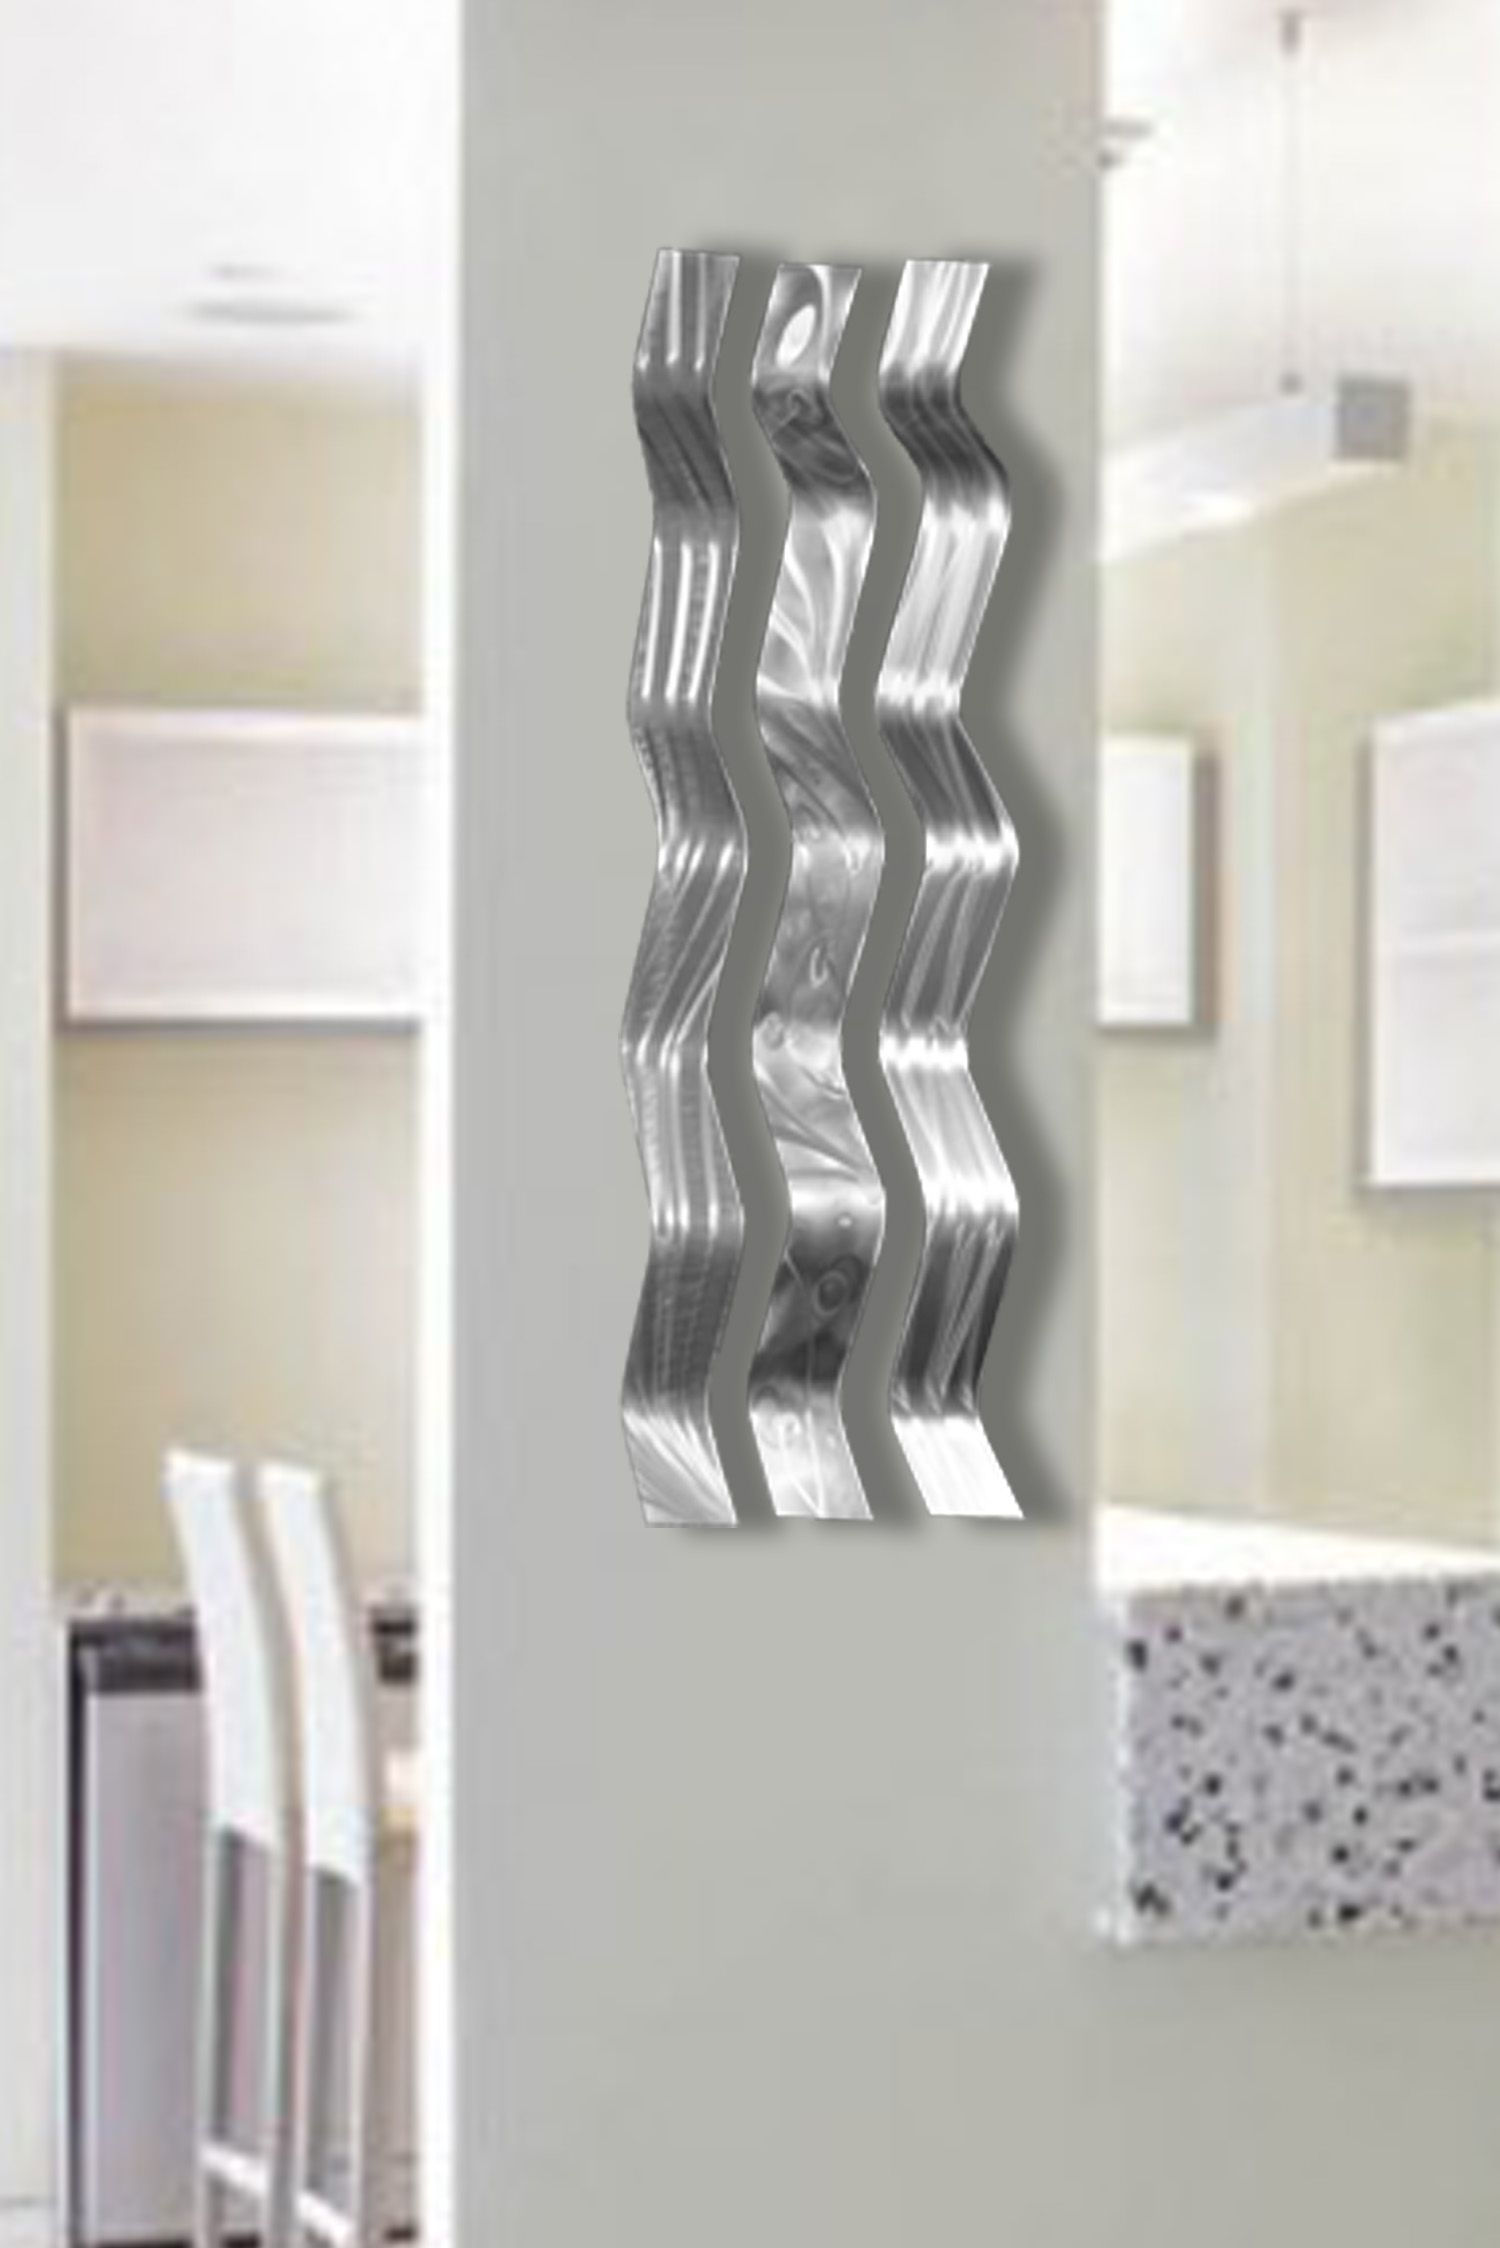 Harmony Silver  Metal Wall Sculpture Art, Wavy Pieces, Abstract With Regard To Current Bronze Metal Wall Sculptures (View 15 of 20)